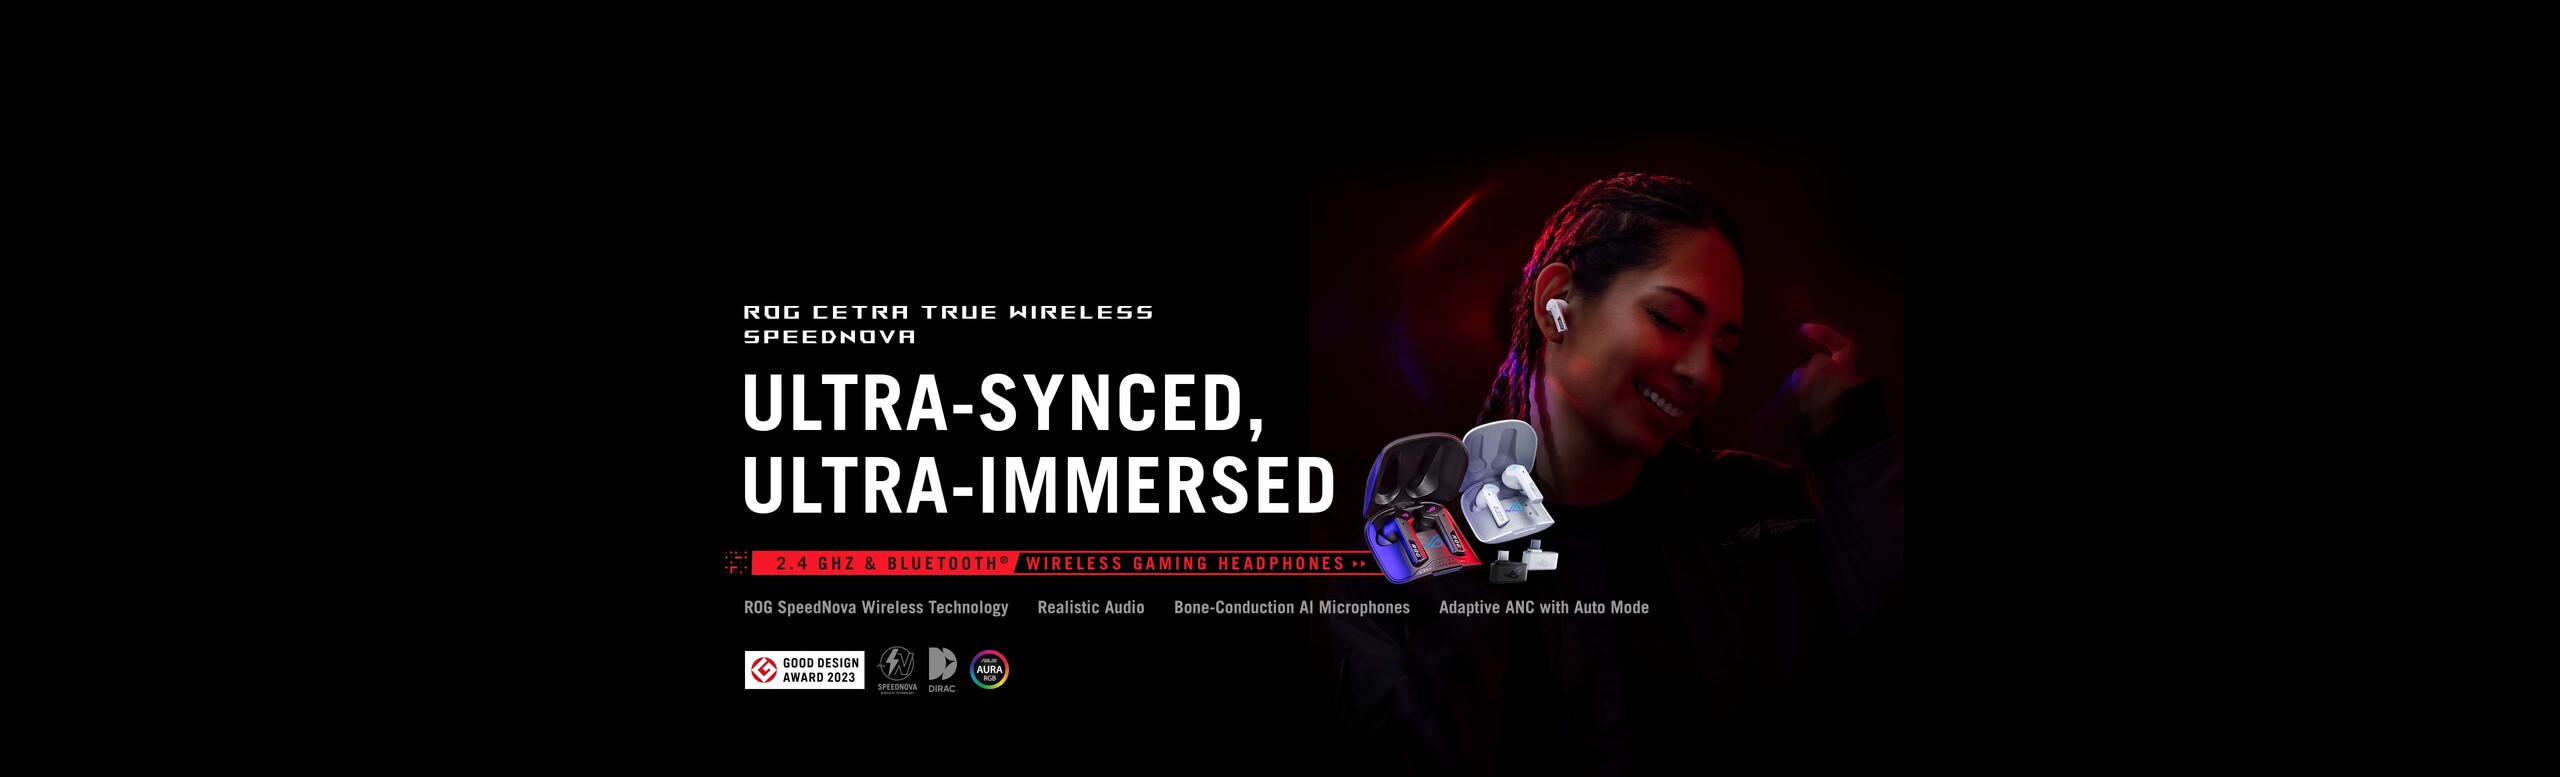 The ROG Cetra True Wireless SpeedNova headphones black version is beside to the moonlight white one, and a woman wearing the headphones in the background and immersed herself with music on the right of the visual.